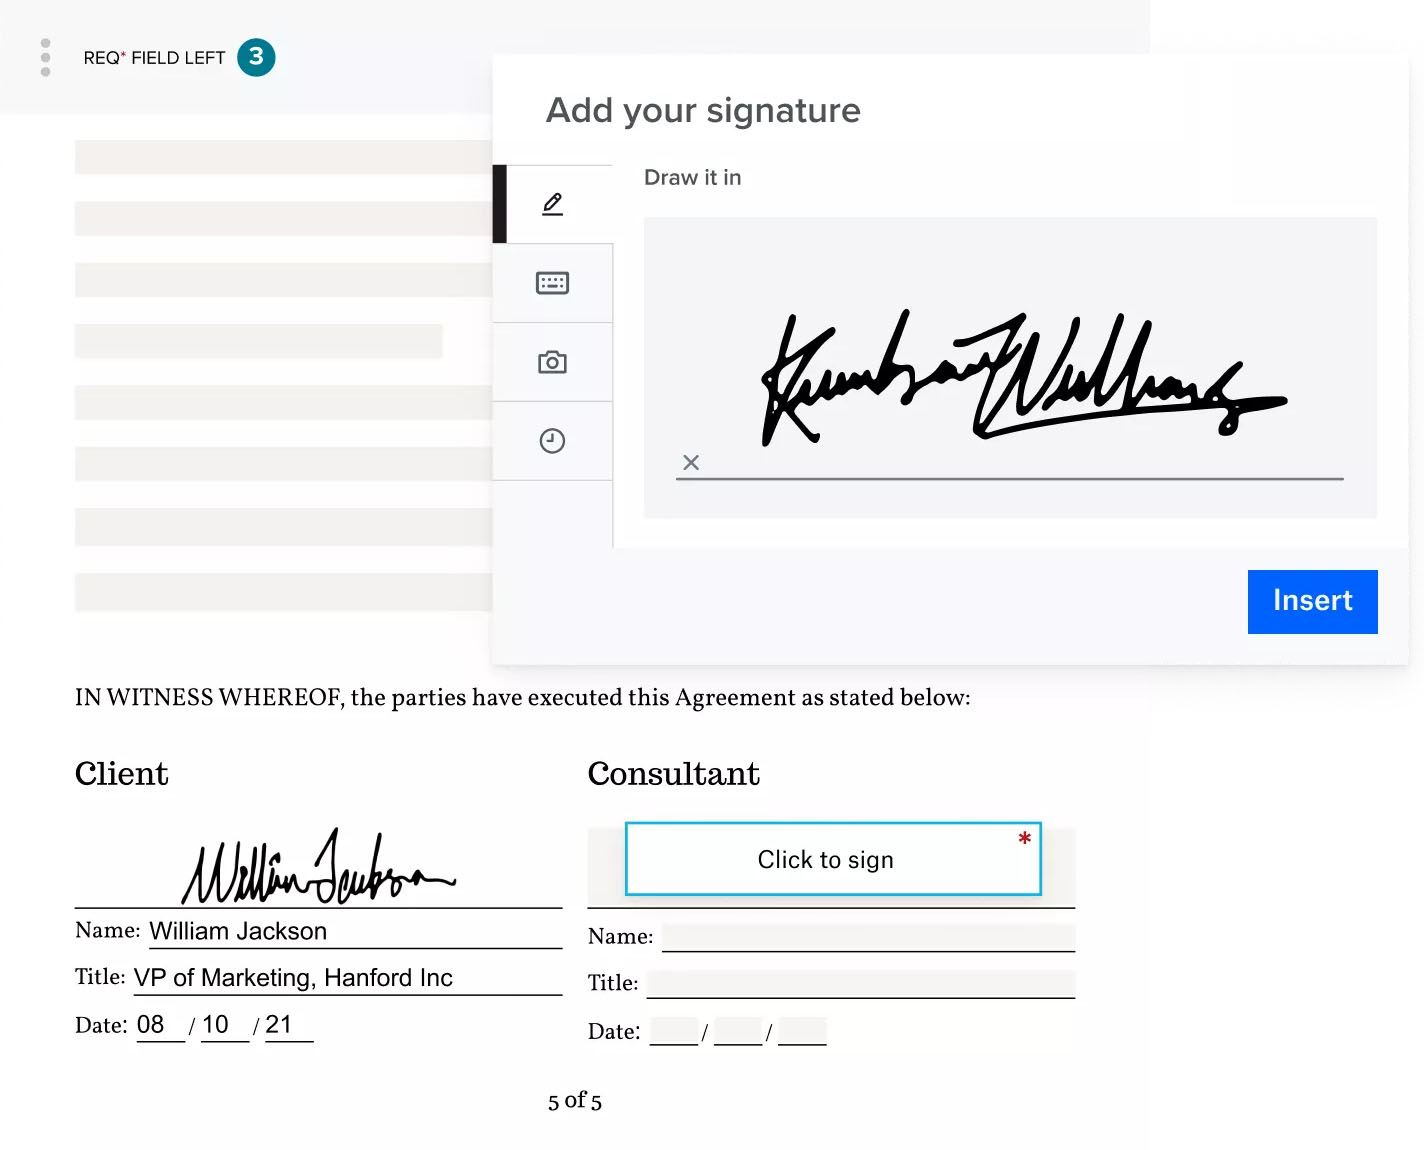 Dropbox interface showing a pop-up box that allows users to add electronic signatures and another window displaying signature fields for "Client" and "Consultant".